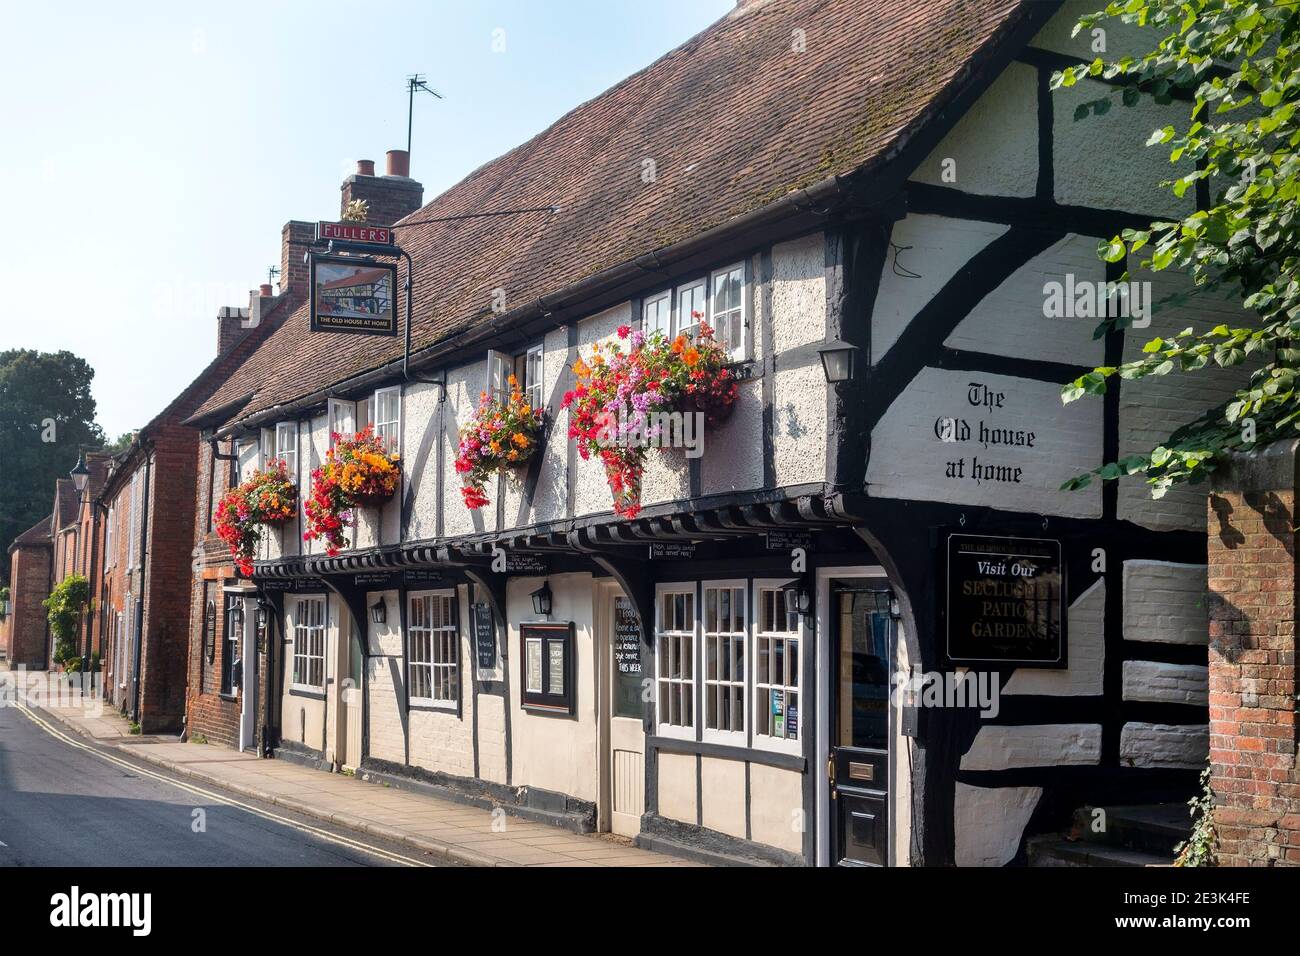 The Old House at Home Public House,Havant, Hampshire, UK Stock Photo